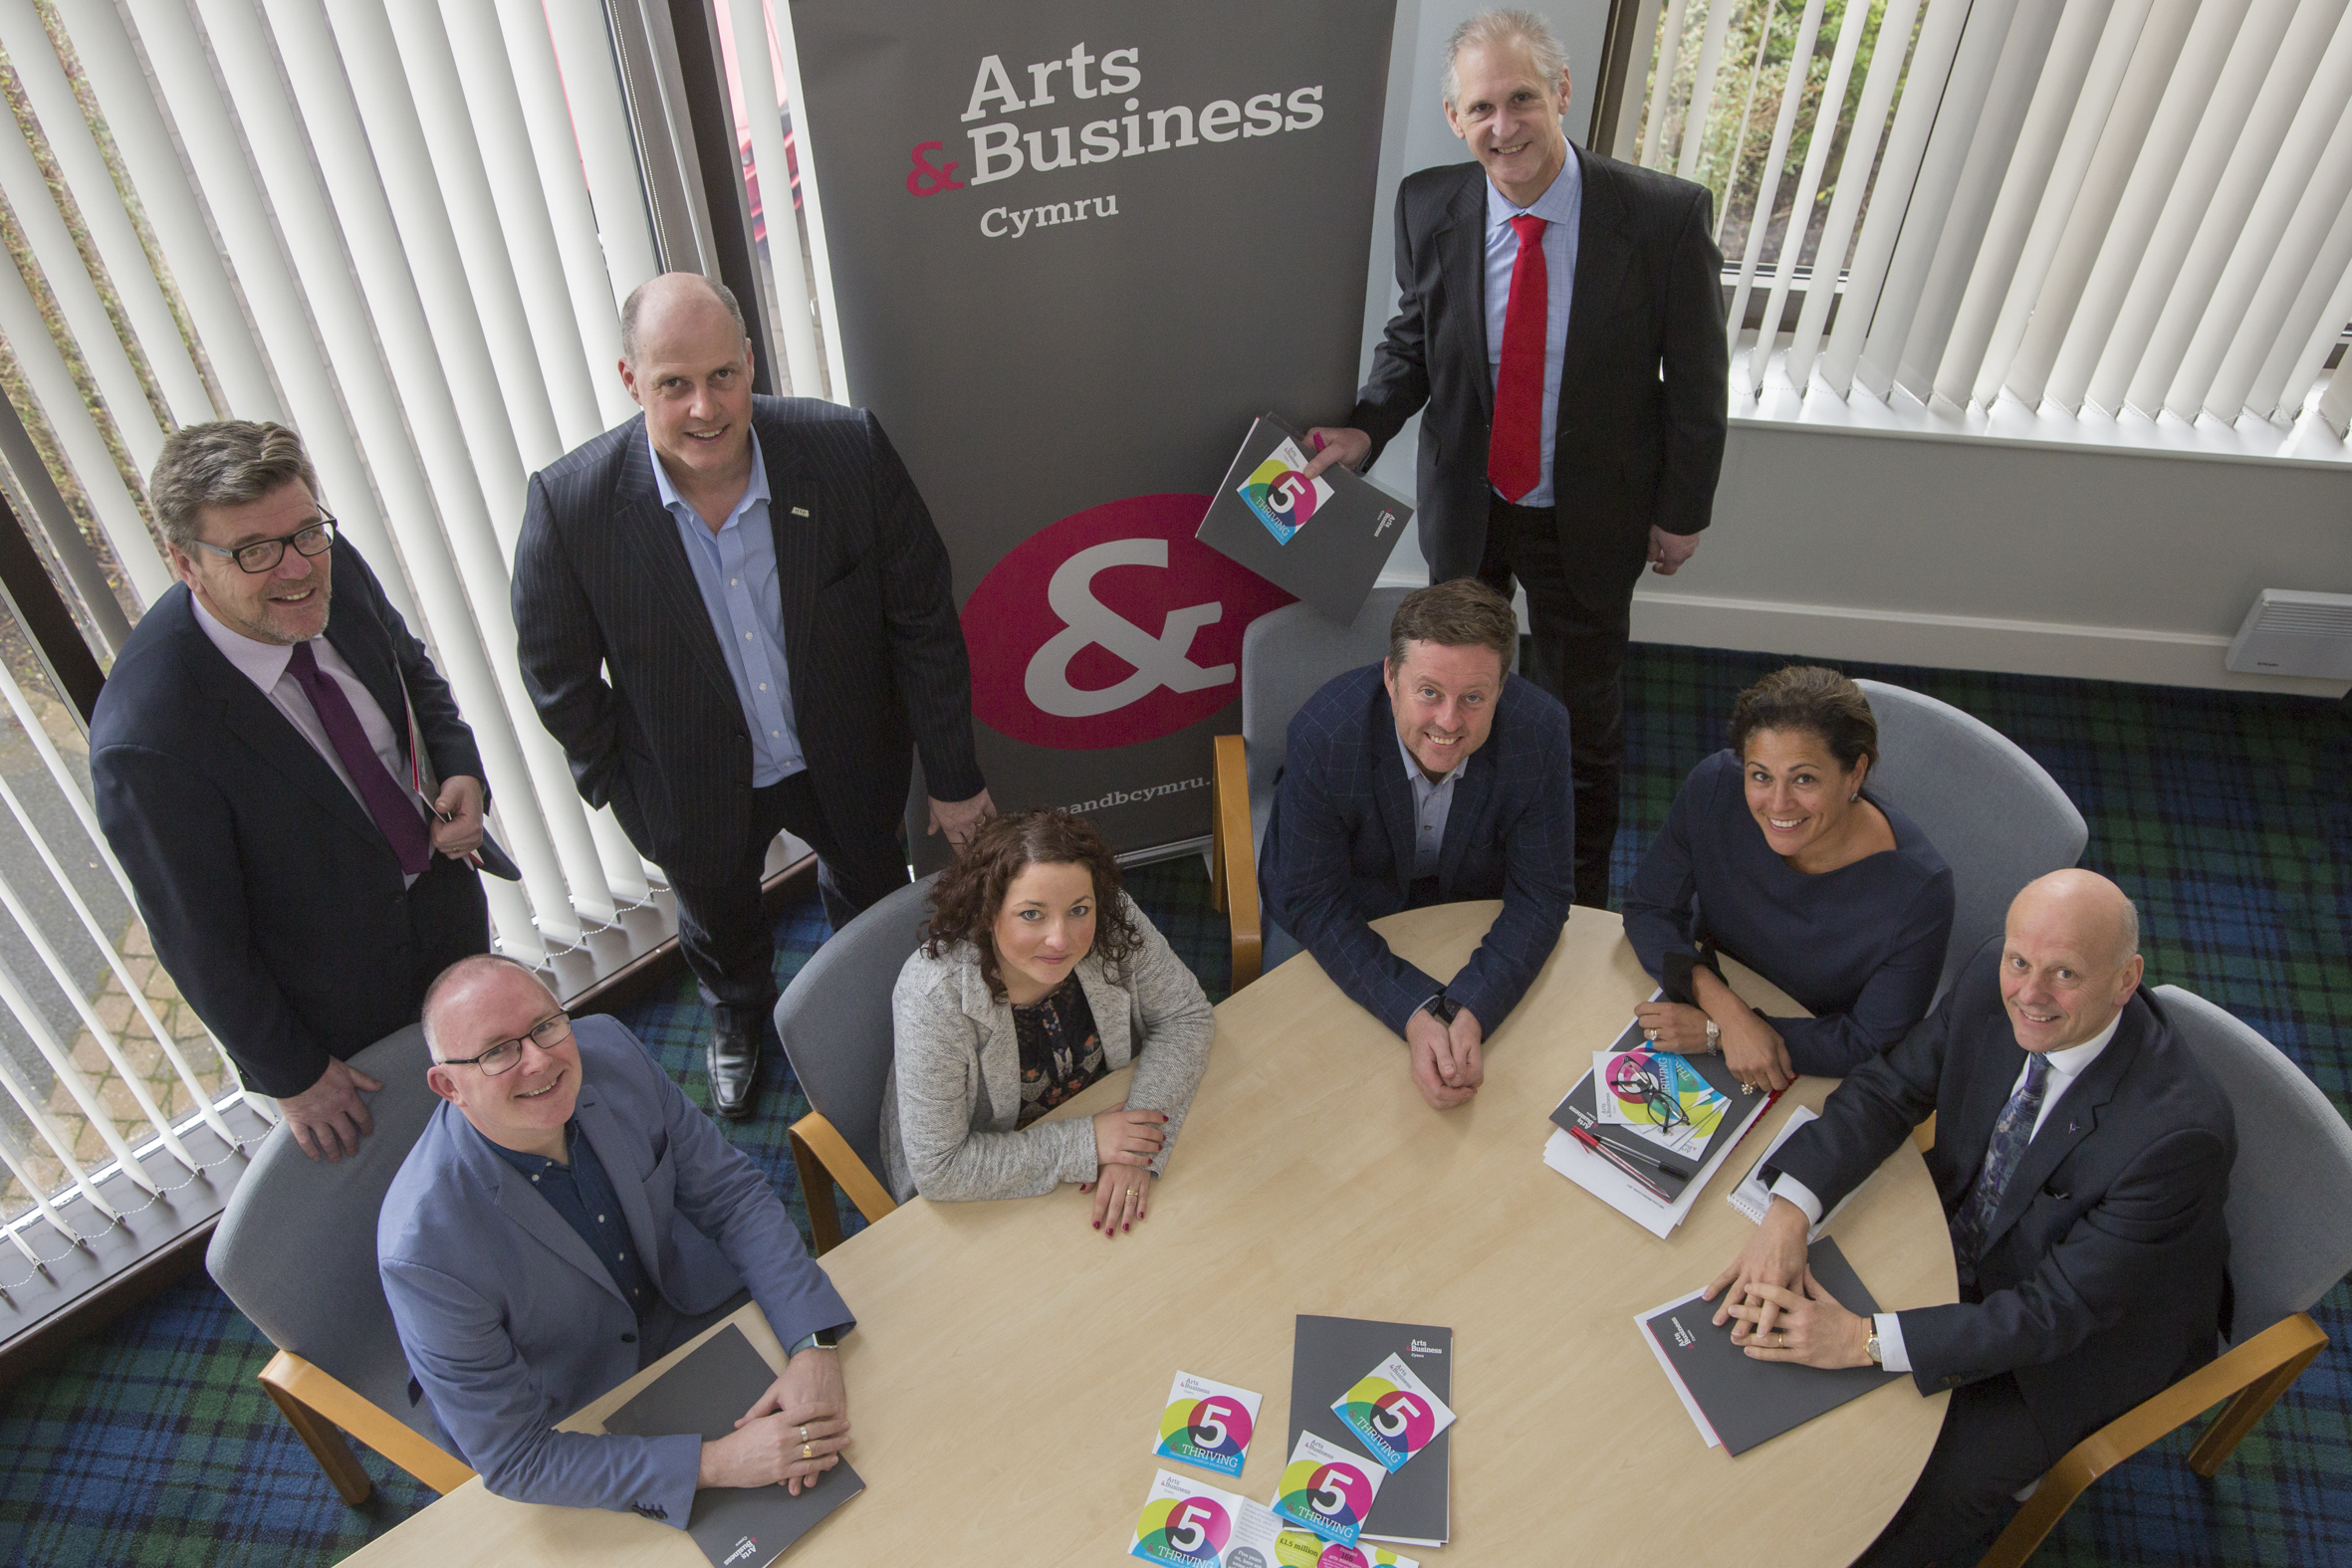 Magnificent Seven from the world of business champion the arts